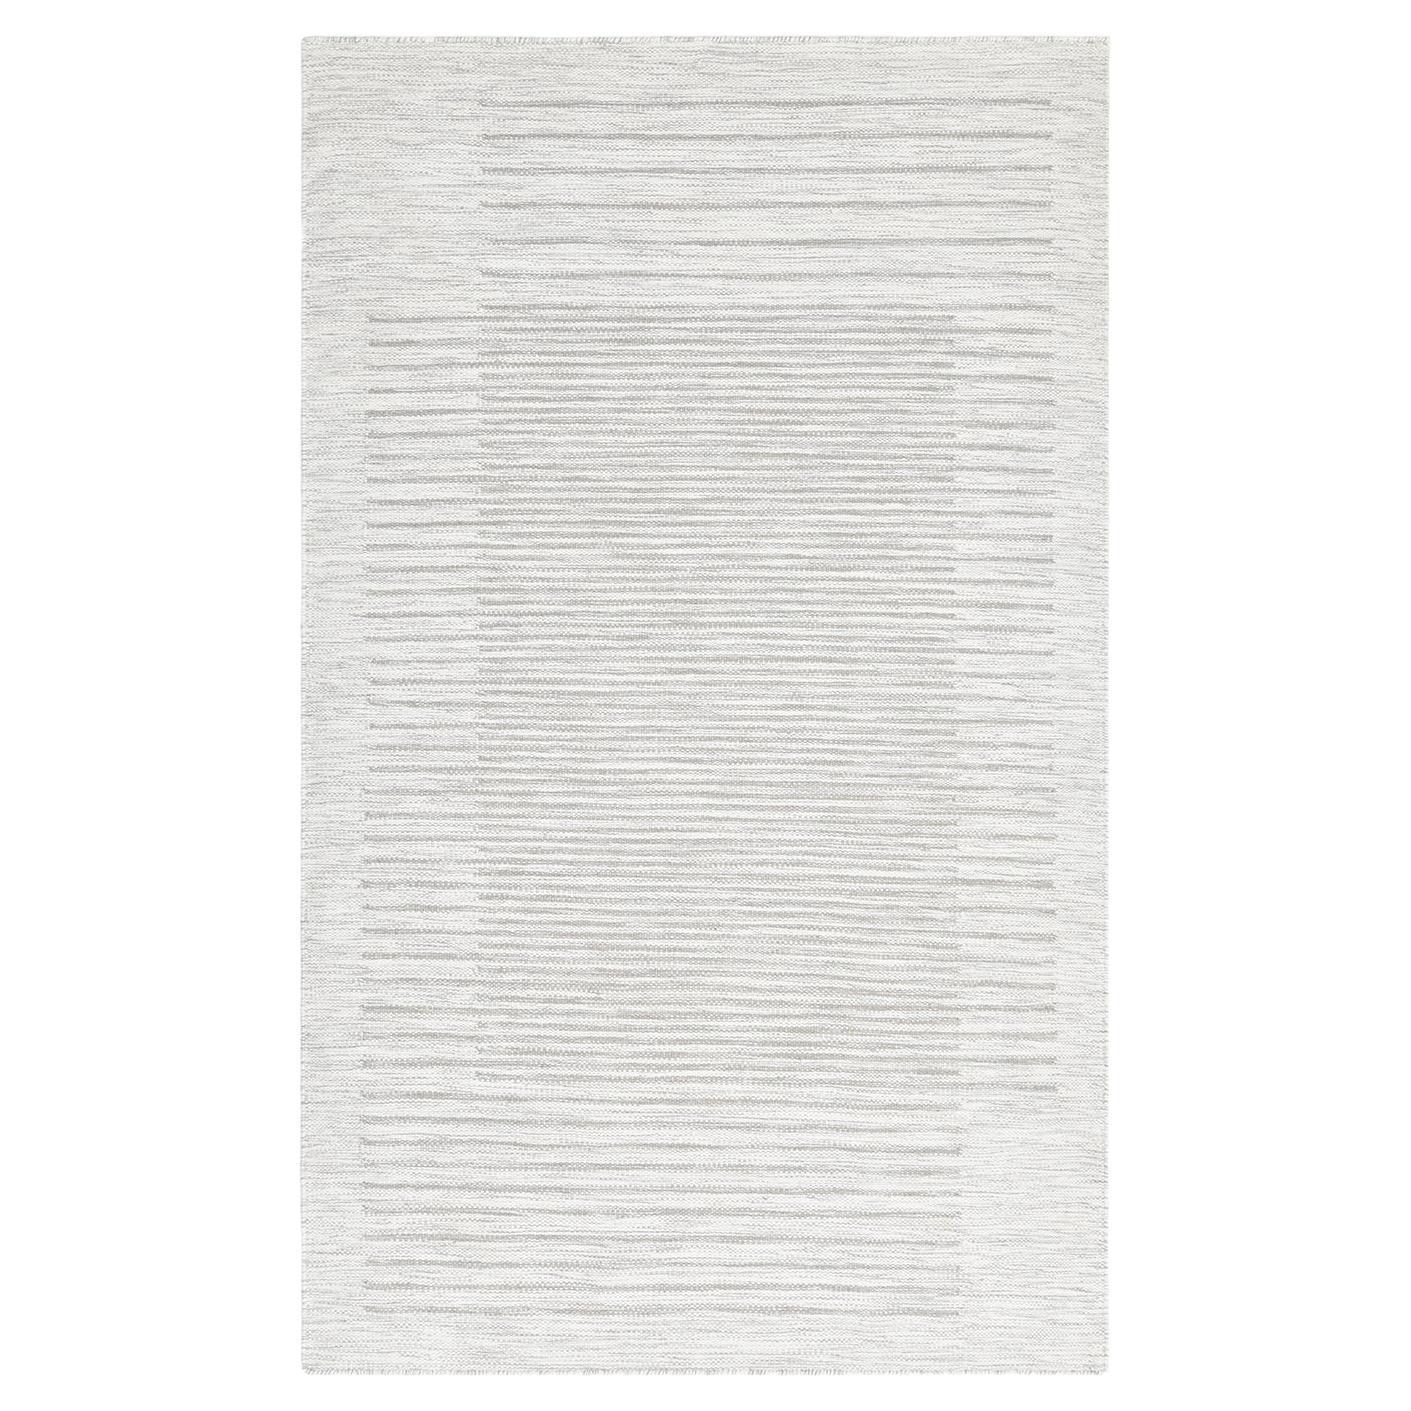 Solo Rugs Flatweave Striped Hand Woven Light Gray 8 x 10 Area Rug